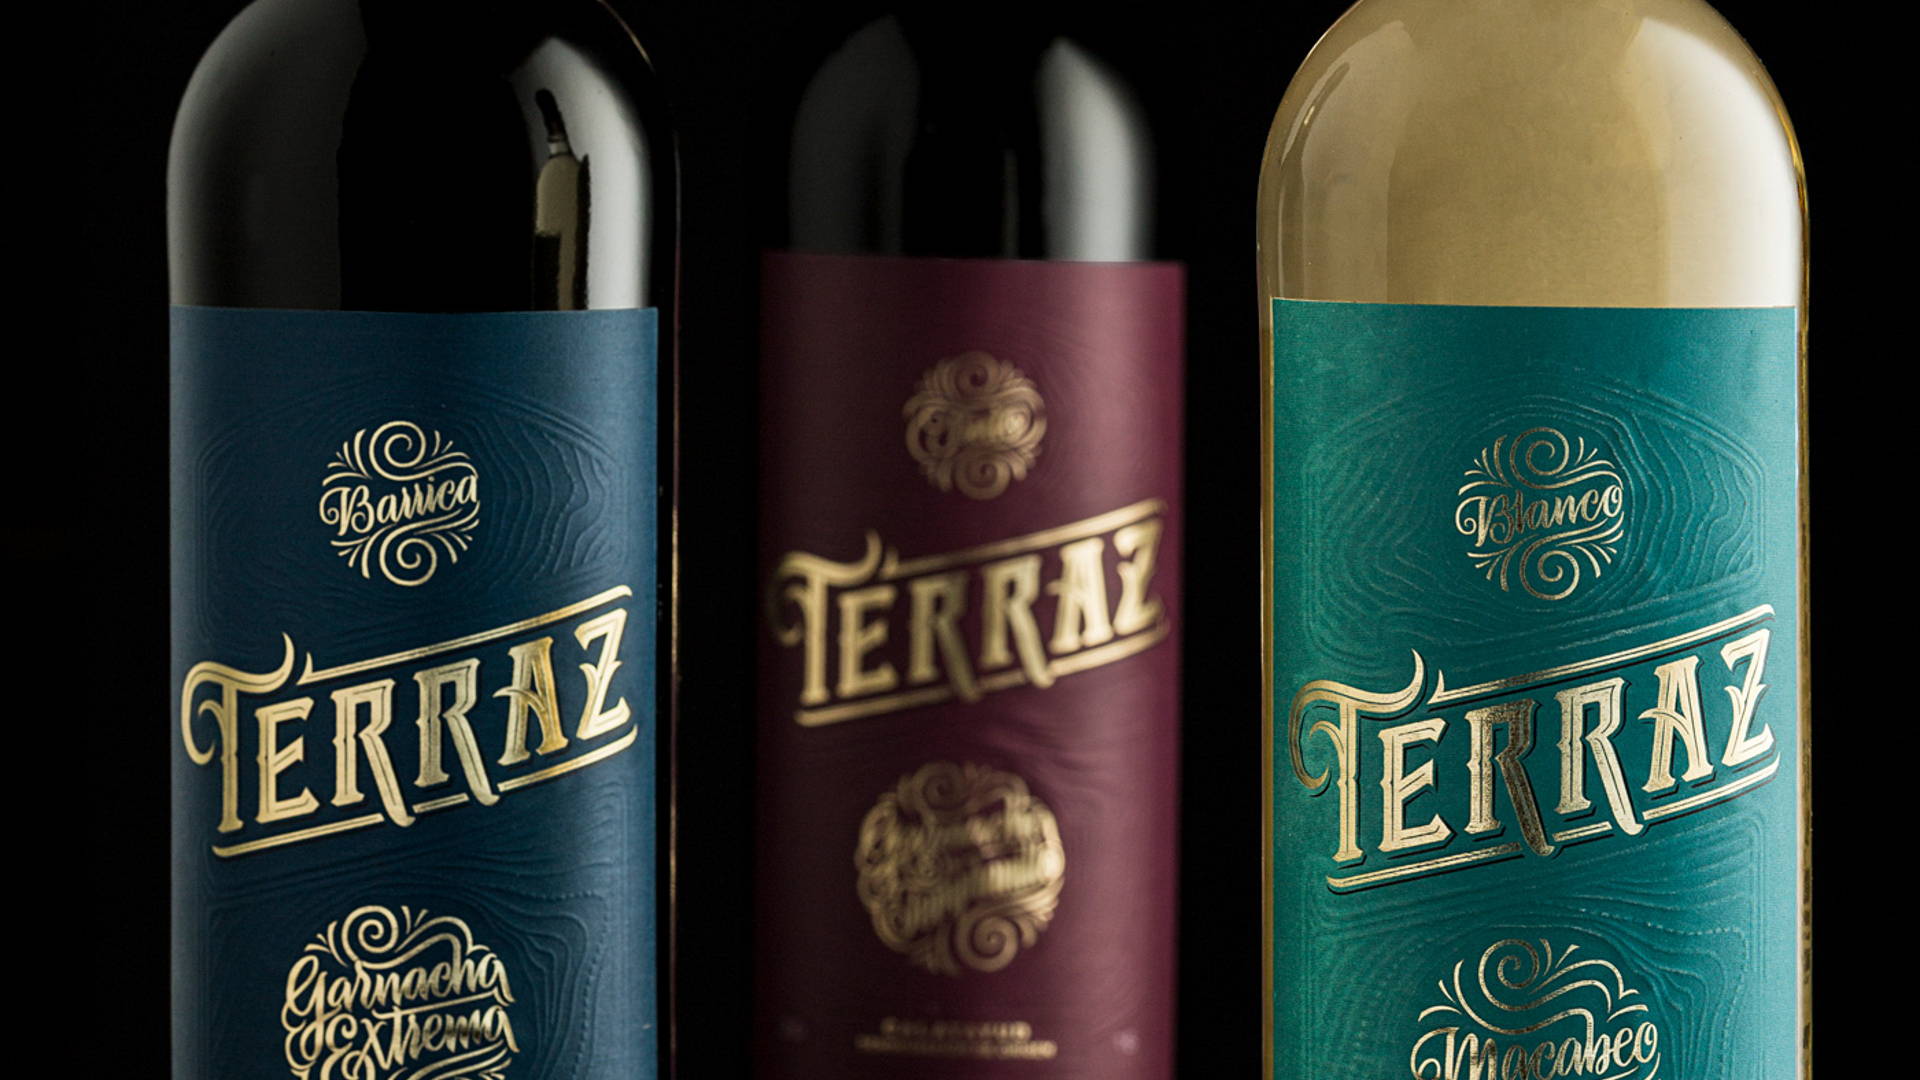 Featured image for Terraz Wine Celebrates Its Origins With Its Packaging